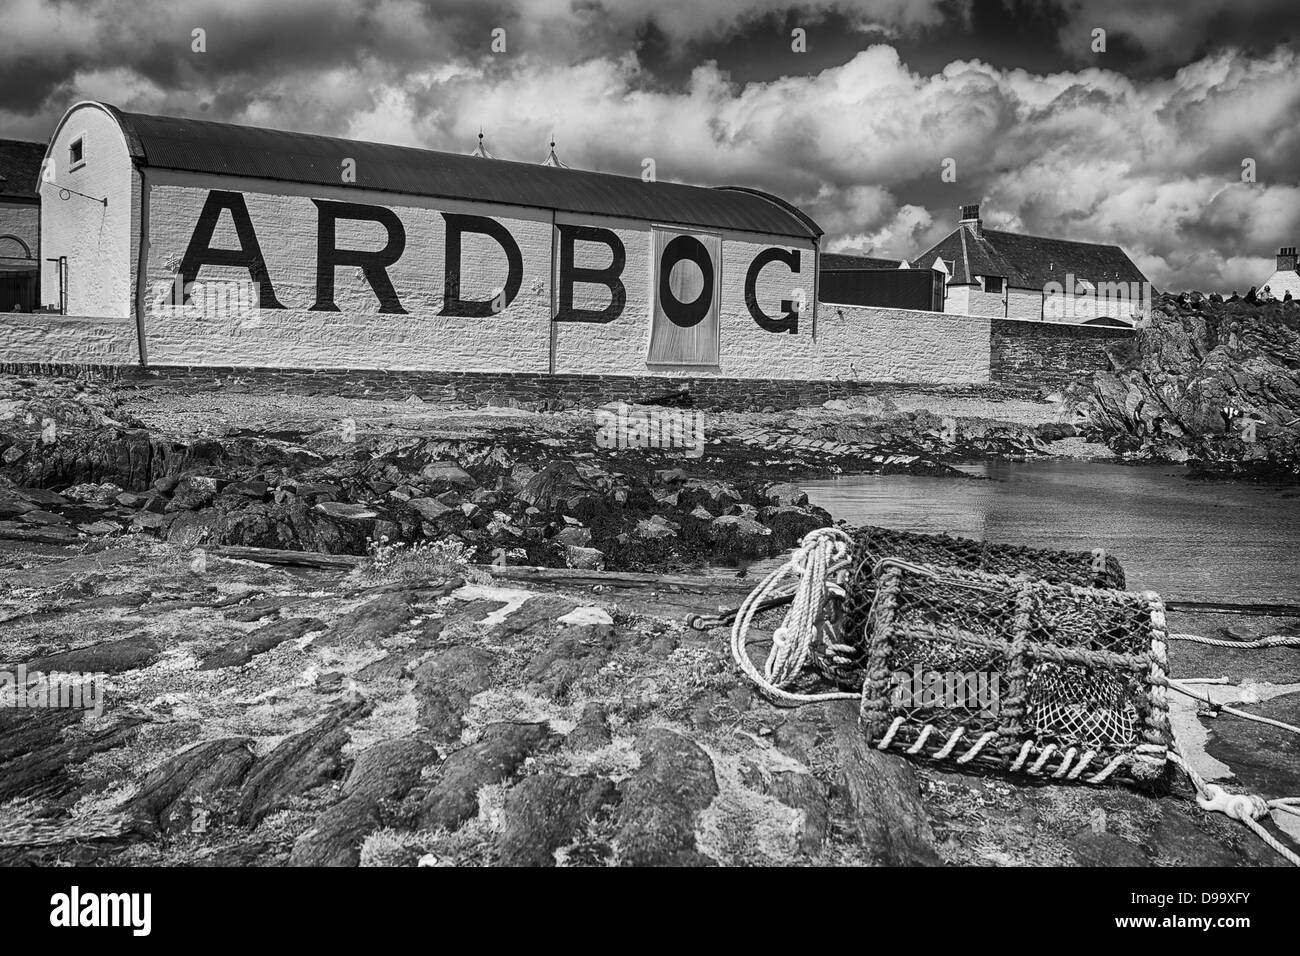 Ardbeg distillery celebrates their Feis Ile open day in 2013.  The 2013 bottling was called Ardbog hence the change in name. Stock Photo